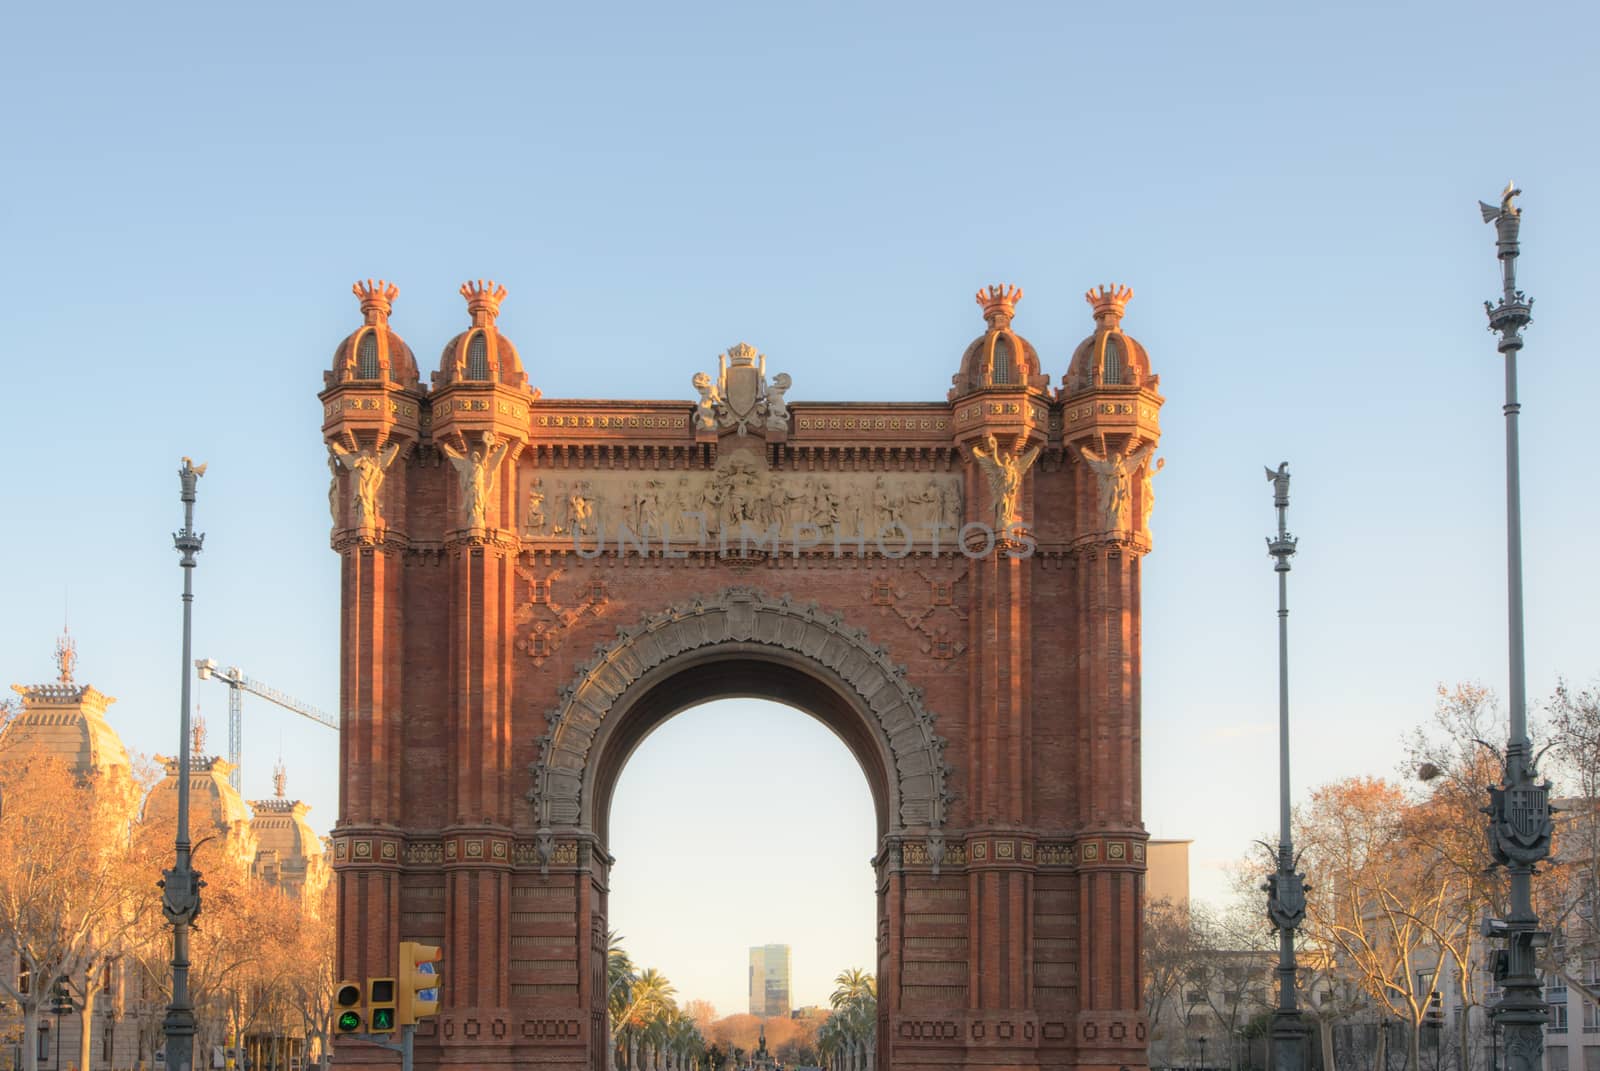 Arc De Triomf Barcelona, Spain, one of Europe's tourist attractions.